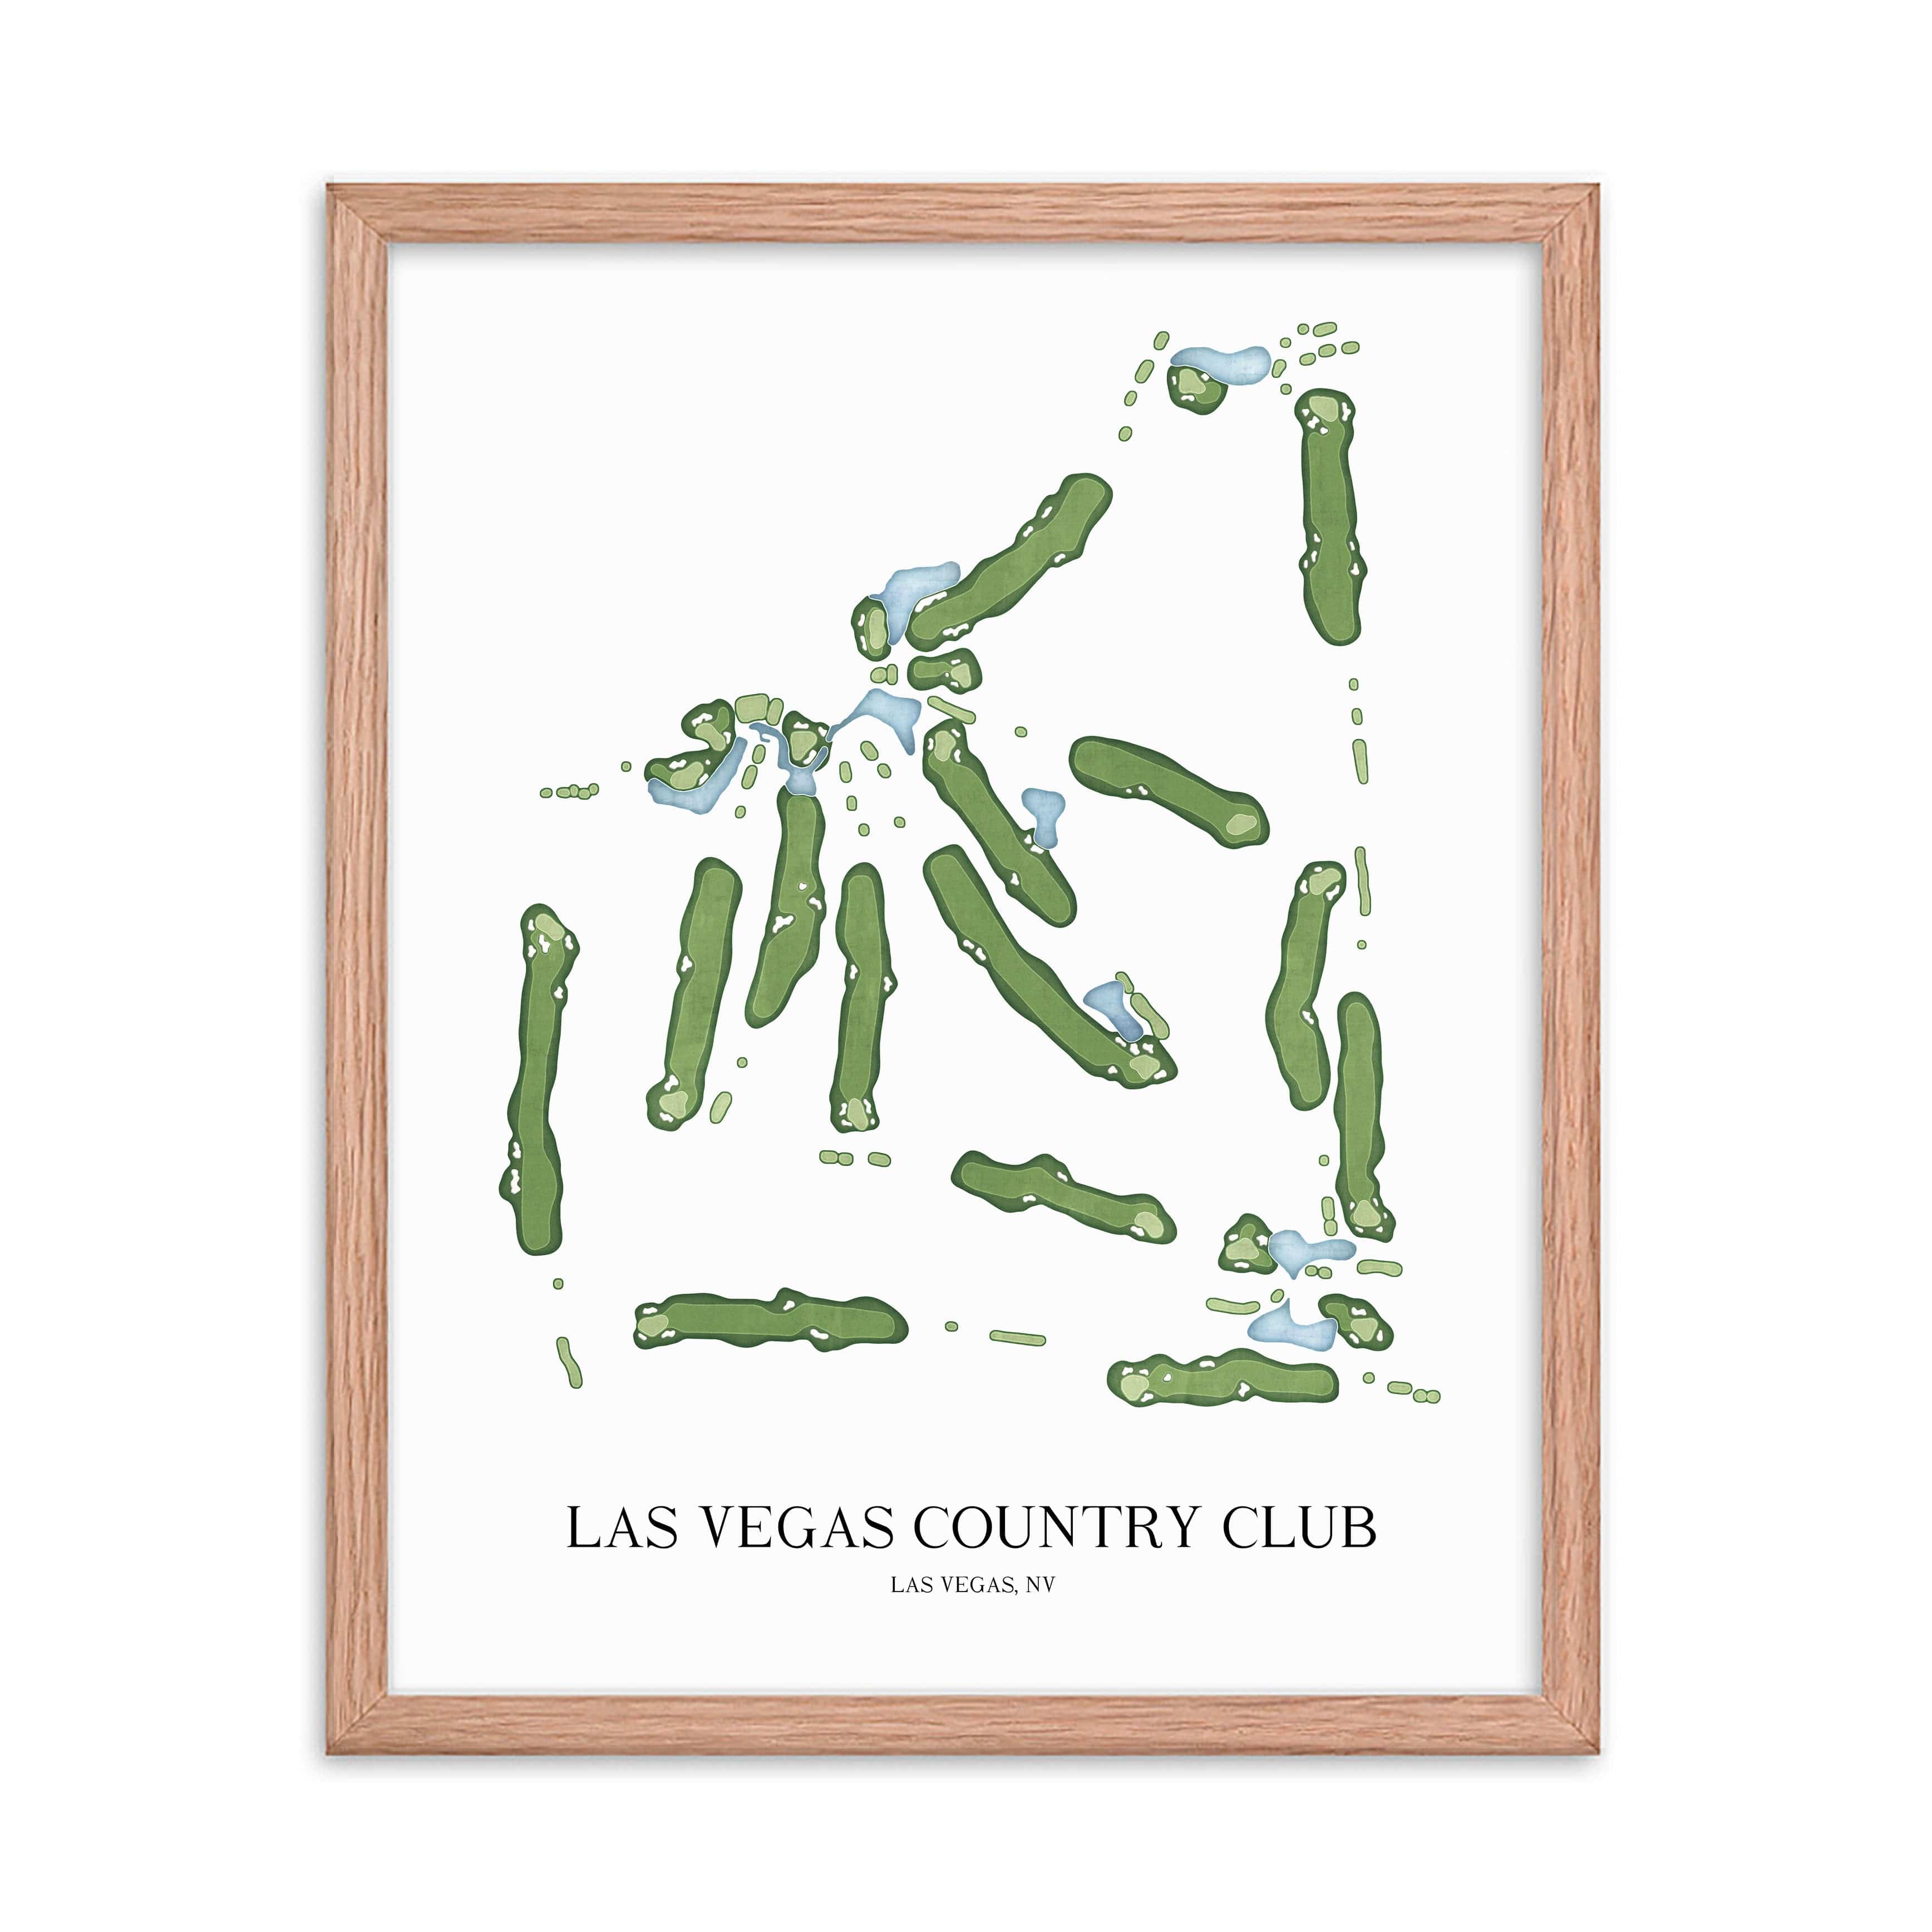 The 19th Hole Golf Shop - Golf Course Prints -  Las Vegas Country Club Golf Course Map